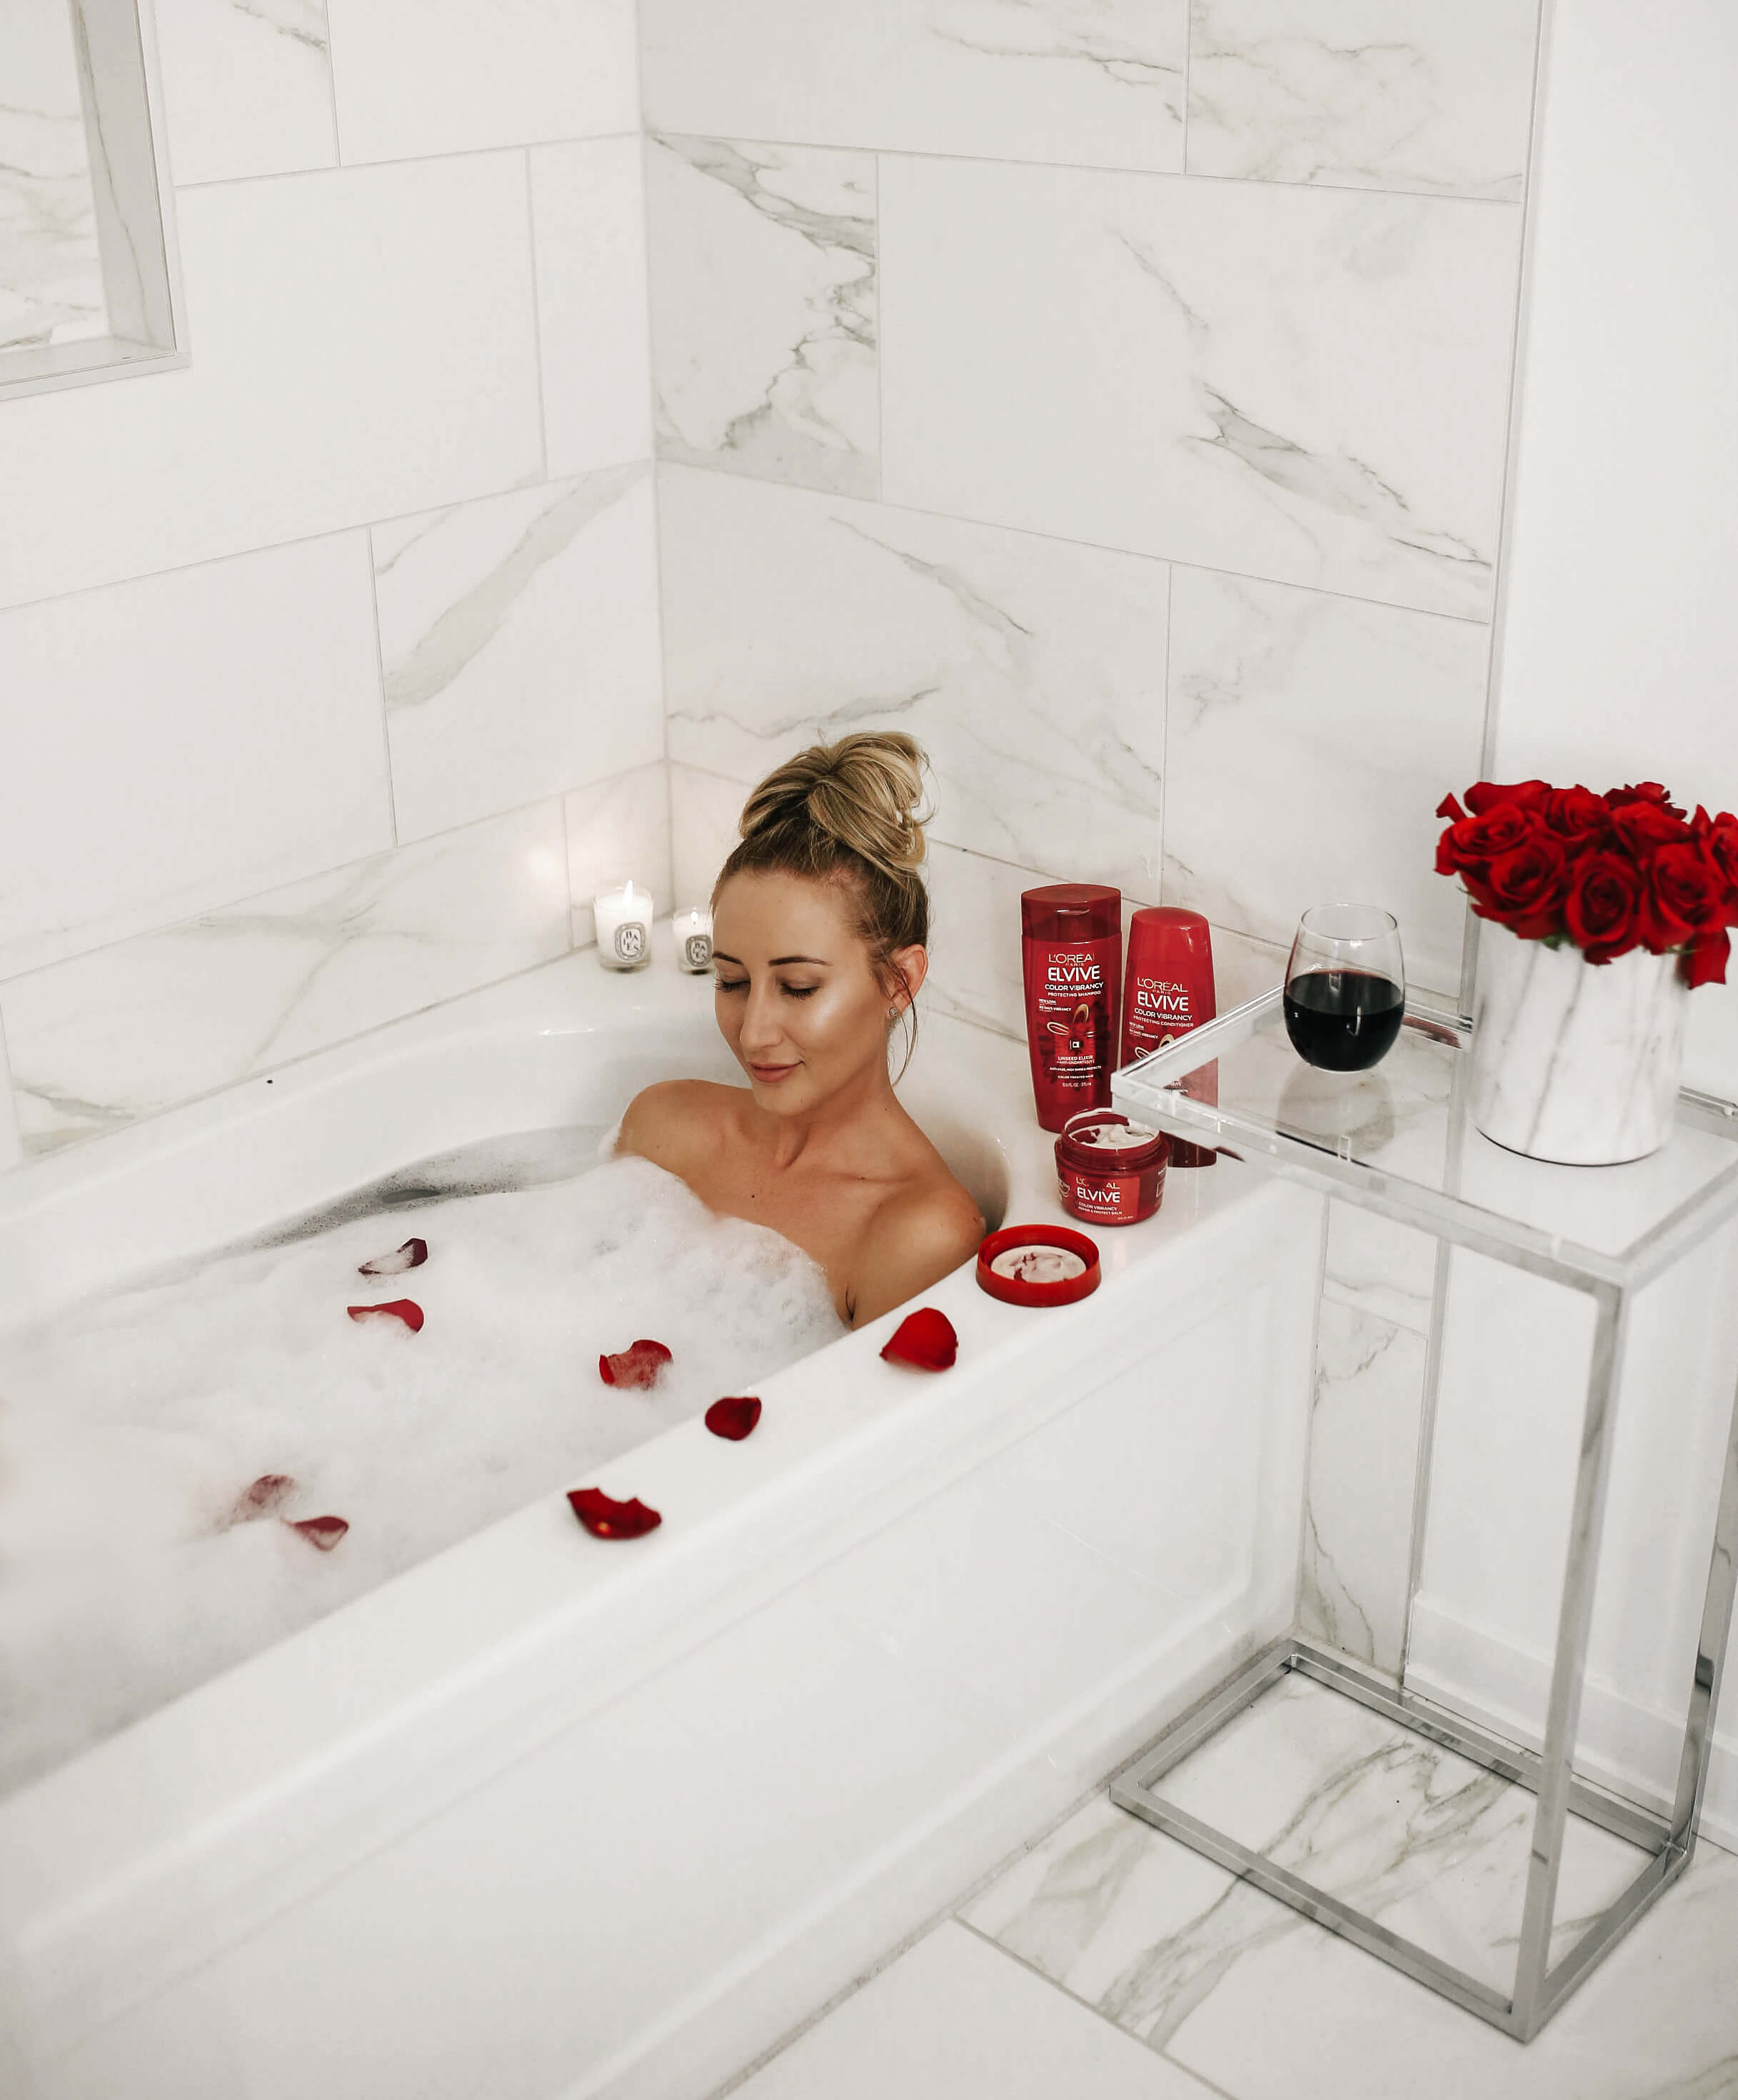 Carly Cristman, L'Oreal Elvive Color Vibrancy, Marble Bathroom, how to relax at home, Valentine's Day